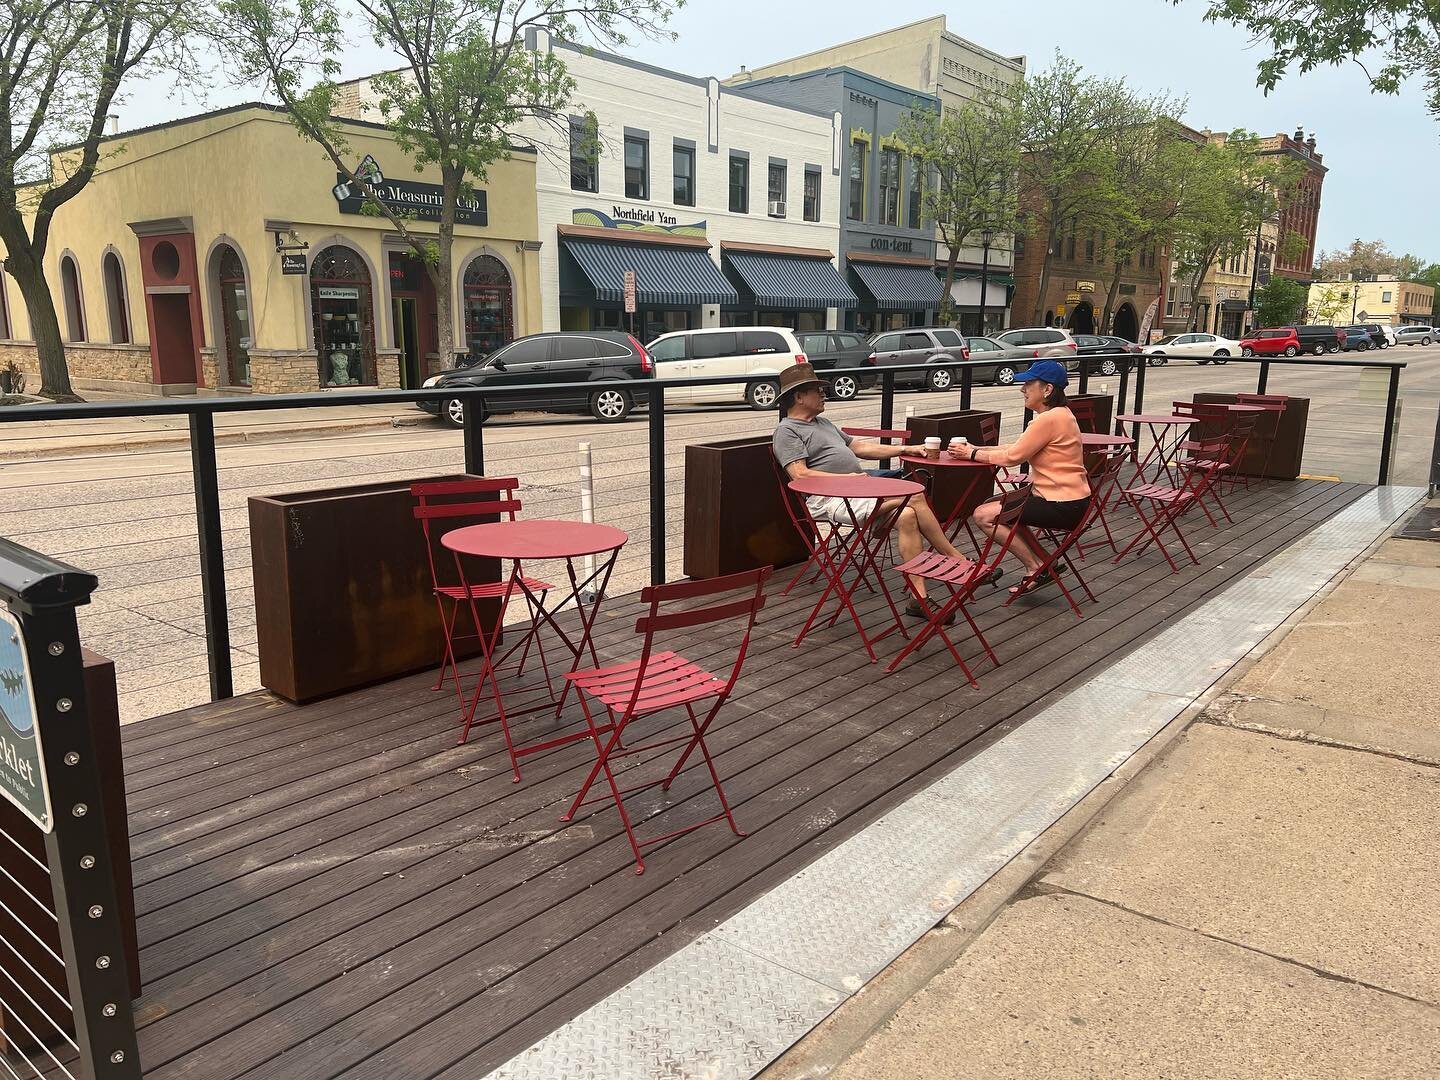 Our parklet is back just in time for this beautiful weather! #northfieldminnesota #goodbyebluemondaycoffeehouse